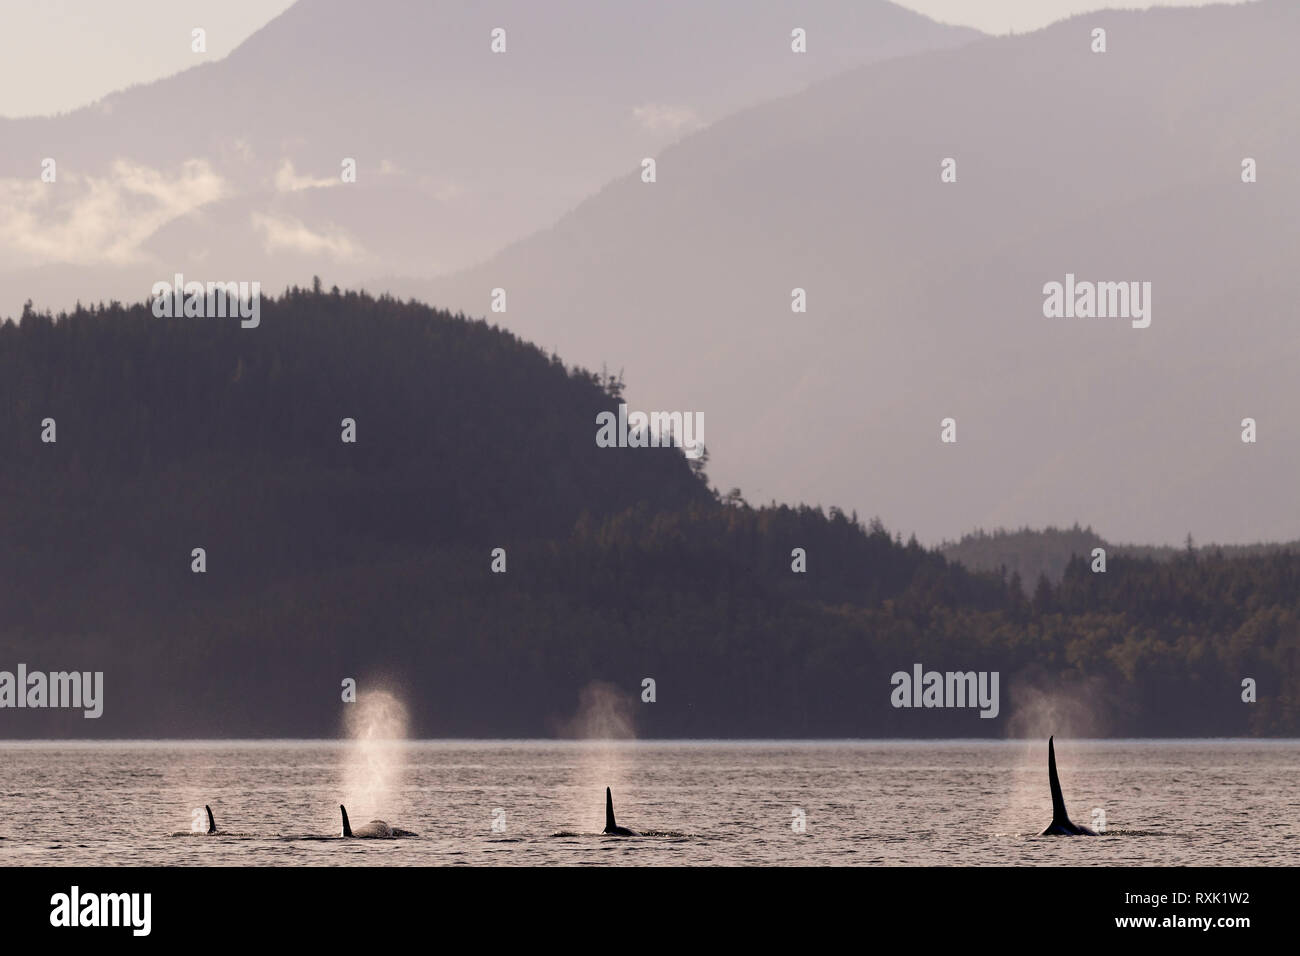 Northern resident orca whale pod (killer whales, Orcinus orca) travelling through Blackfish Sound on a beautiful late afternoon with scenic vancouver Island Mountains as a backdrop, First Nations Territory, Vancouver Island, British Columbia, Canada. Stock Photo